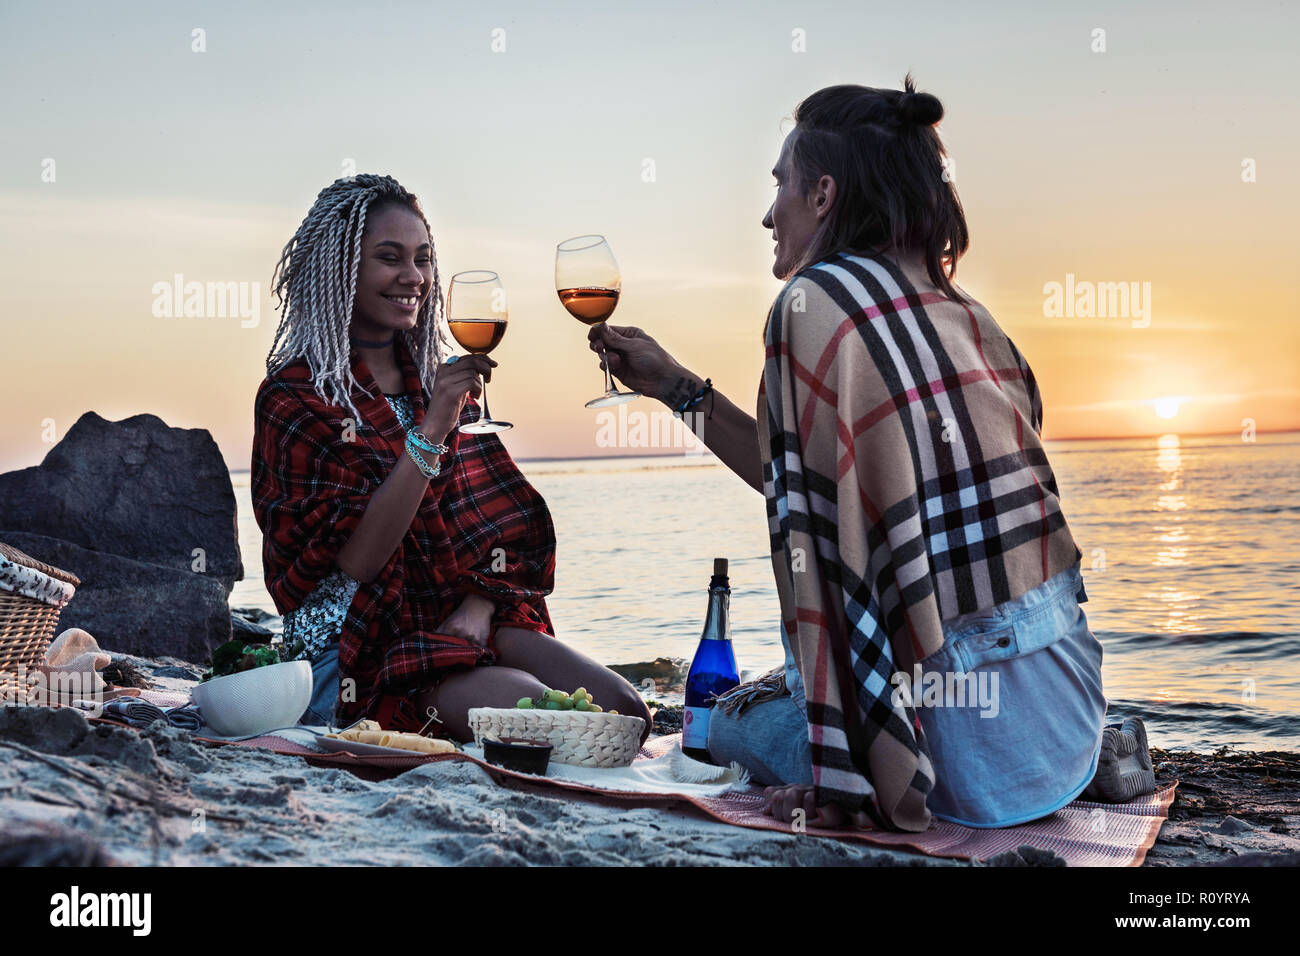 Beaming woman drinking champagne with her man having picnic Stock Photo